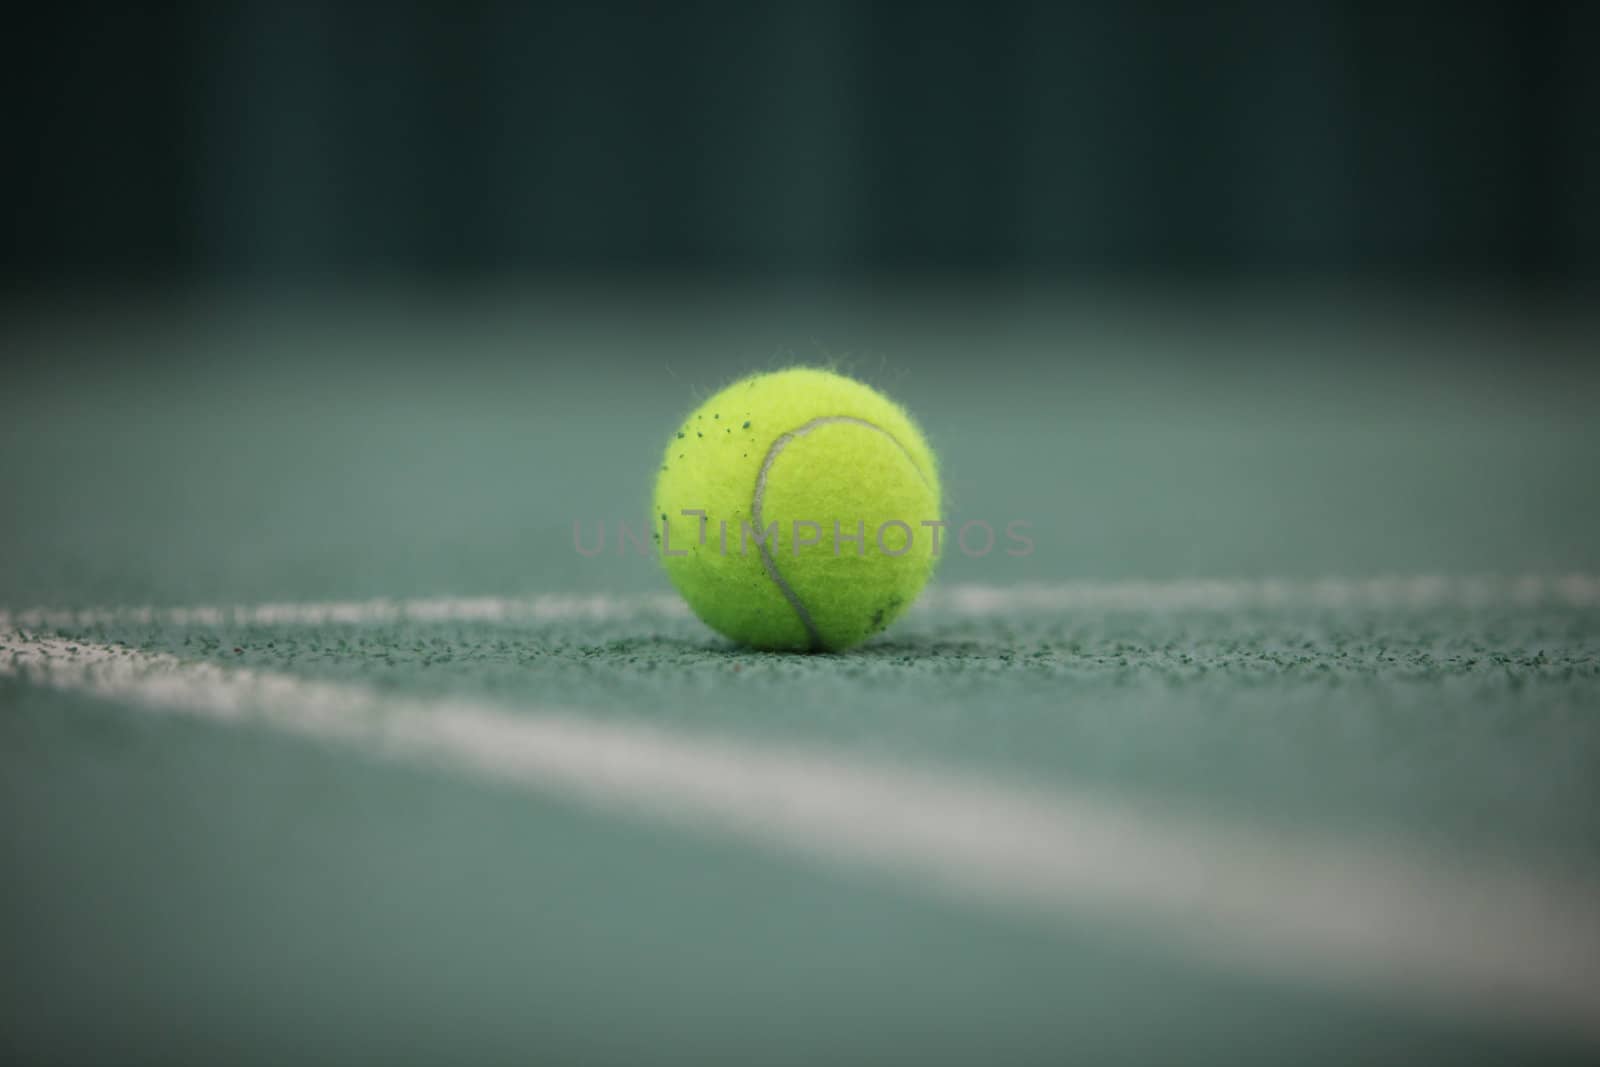 Close up of a tennis ball in the foreground, shot from low angle